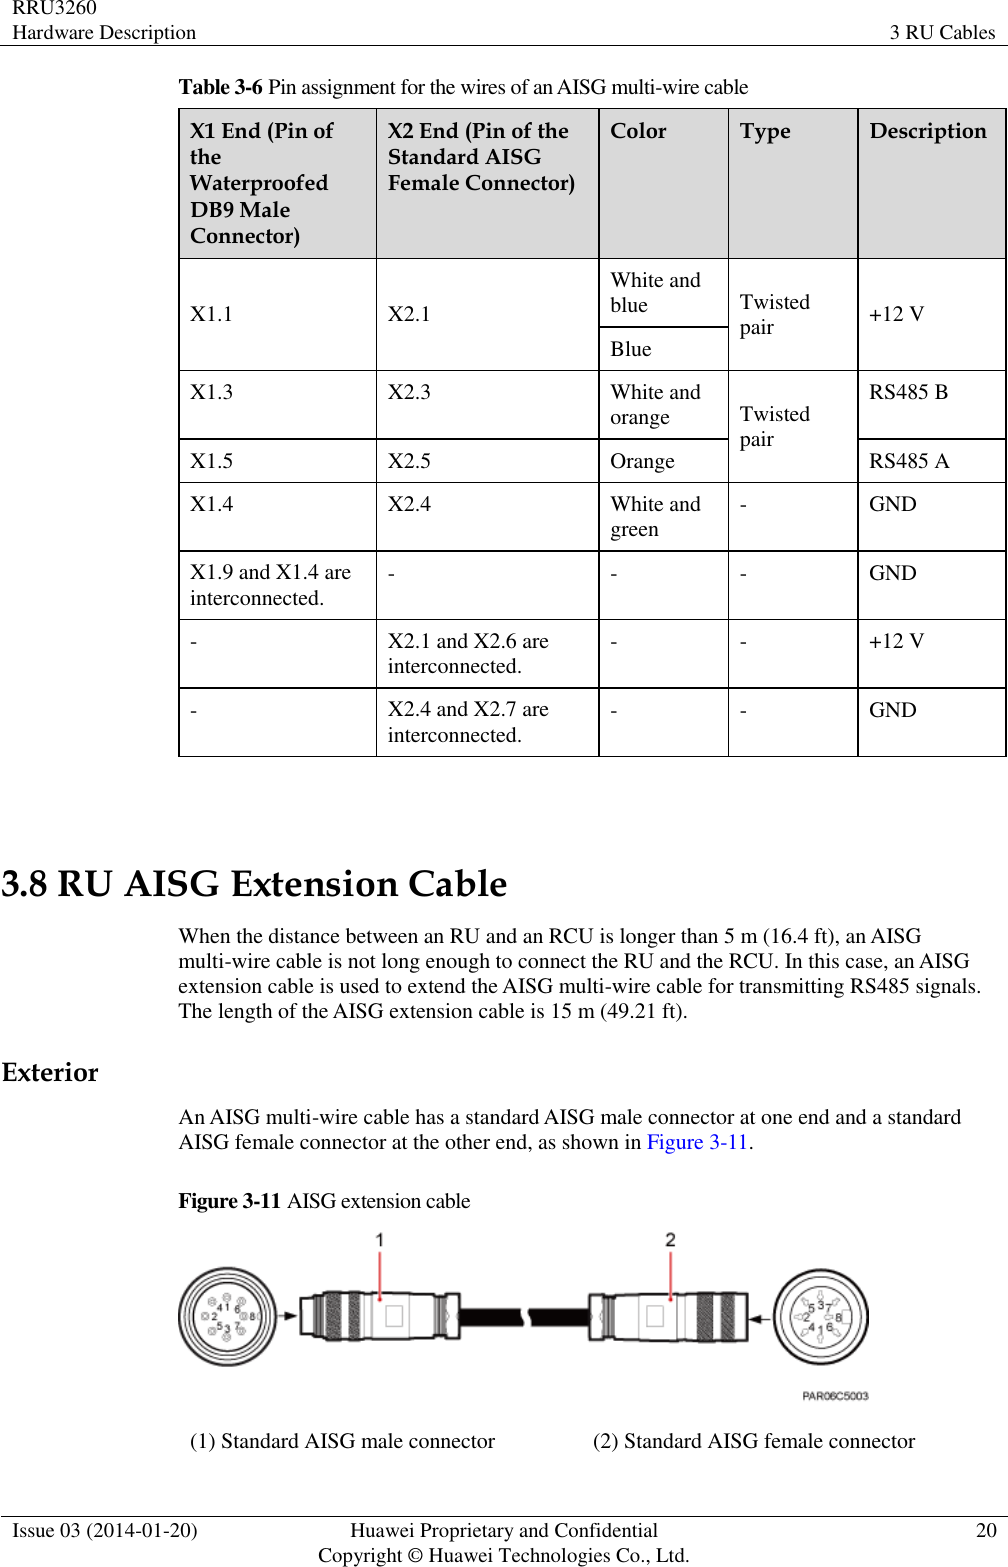 RRU3260 Hardware Description 3 RU Cables  Issue 03 (2014-01-20) Huawei Proprietary and Confidential                                     Copyright © Huawei Technologies Co., Ltd. 20  Table 3-6 Pin assignment for the wires of an AISG multi-wire cable X1 End (Pin of the Waterproofed DB9 Male Connector) X2 End (Pin of the Standard AISG Female Connector) Color Type Description X1.1 X2.1 White and blue Twisted pair +12 V Blue X1.3 X2.3 White and orange Twisted pair RS485 B X1.5 X2.5 Orange RS485 A X1.4 X2.4 White and green - GND X1.9 and X1.4 are interconnected. - - - GND - X2.1 and X2.6 are interconnected. - - +12 V - X2.4 and X2.7 are interconnected. - - GND  3.8 RU AISG Extension Cable When the distance between an RU and an RCU is longer than 5 m (16.4 ft), an AISG multi-wire cable is not long enough to connect the RU and the RCU. In this case, an AISG extension cable is used to extend the AISG multi-wire cable for transmitting RS485 signals. The length of the AISG extension cable is 15 m (49.21 ft). Exterior An AISG multi-wire cable has a standard AISG male connector at one end and a standard AISG female connector at the other end, as shown in Figure 3-11. Figure 3-11 AISG extension cable  (1) Standard AISG male connector (2) Standard AISG female connector 